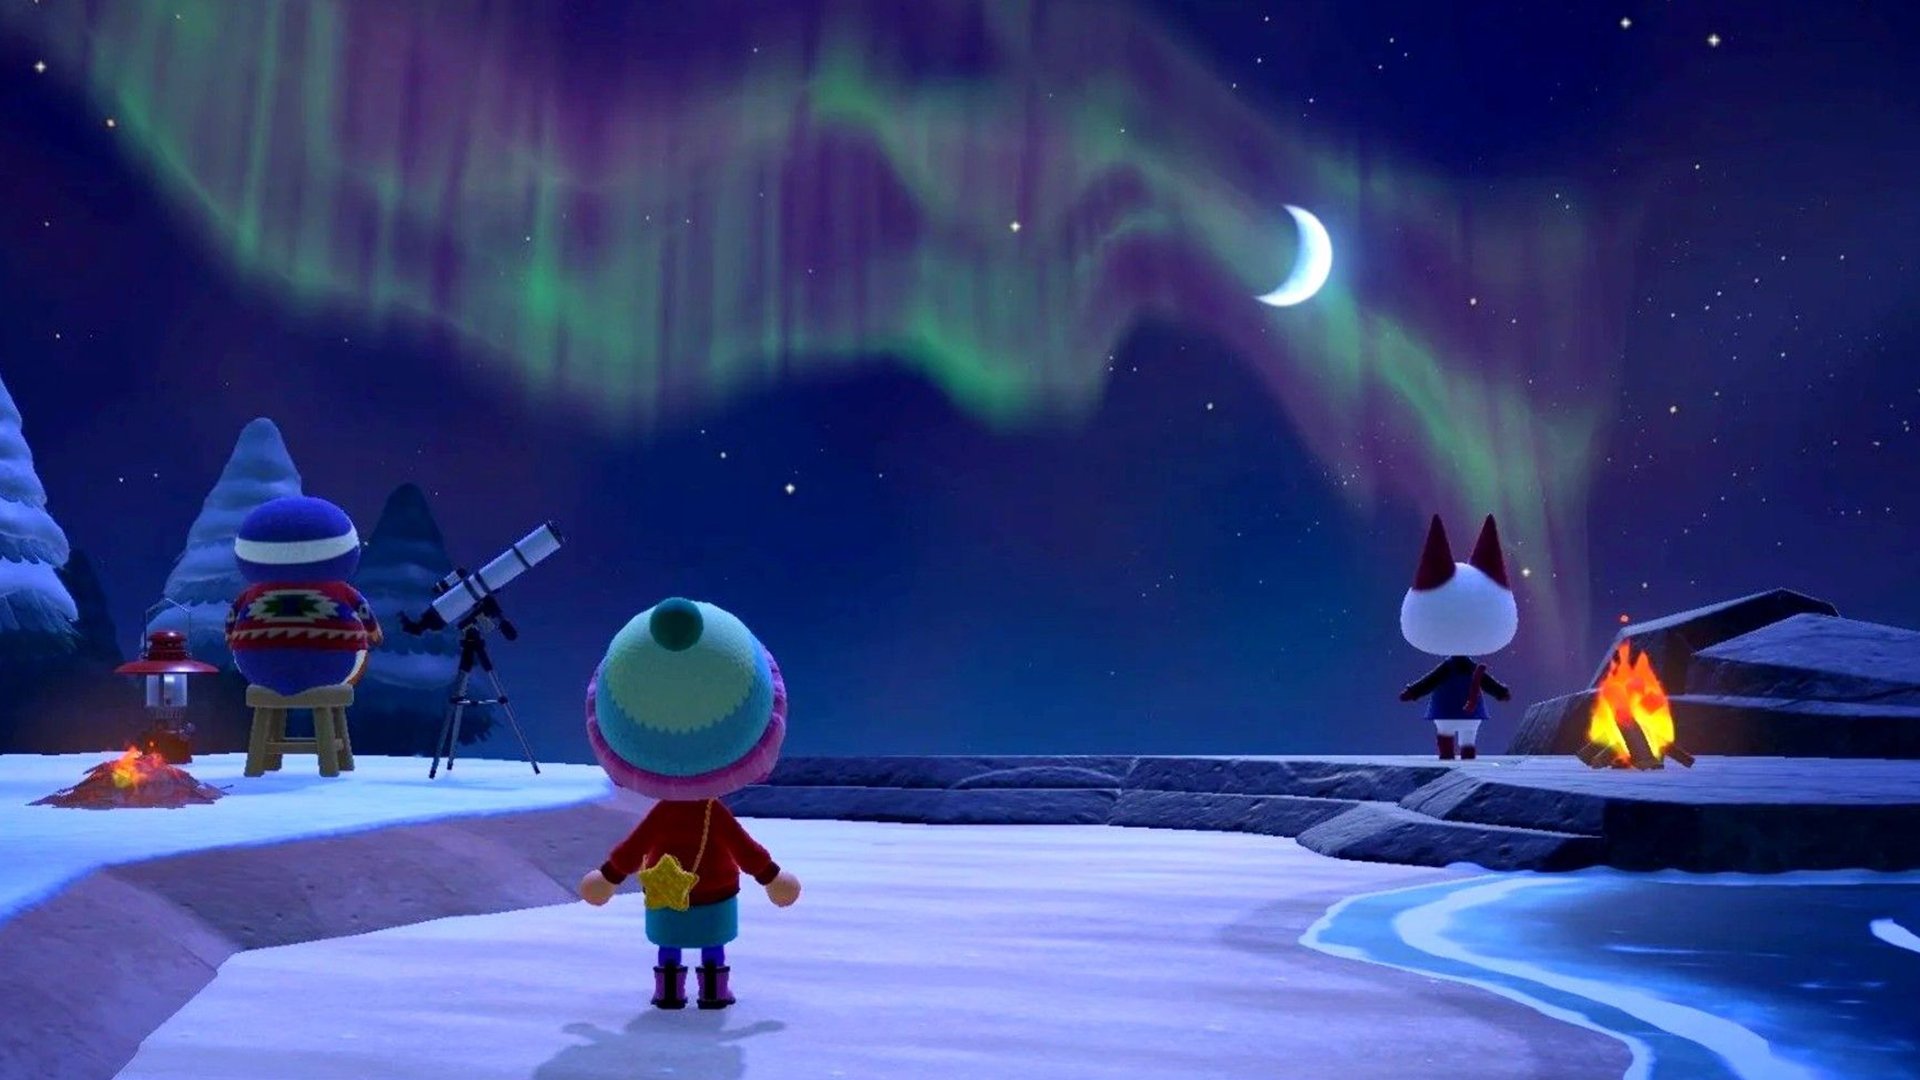 An Animal Crossing player looks at the Northern lights